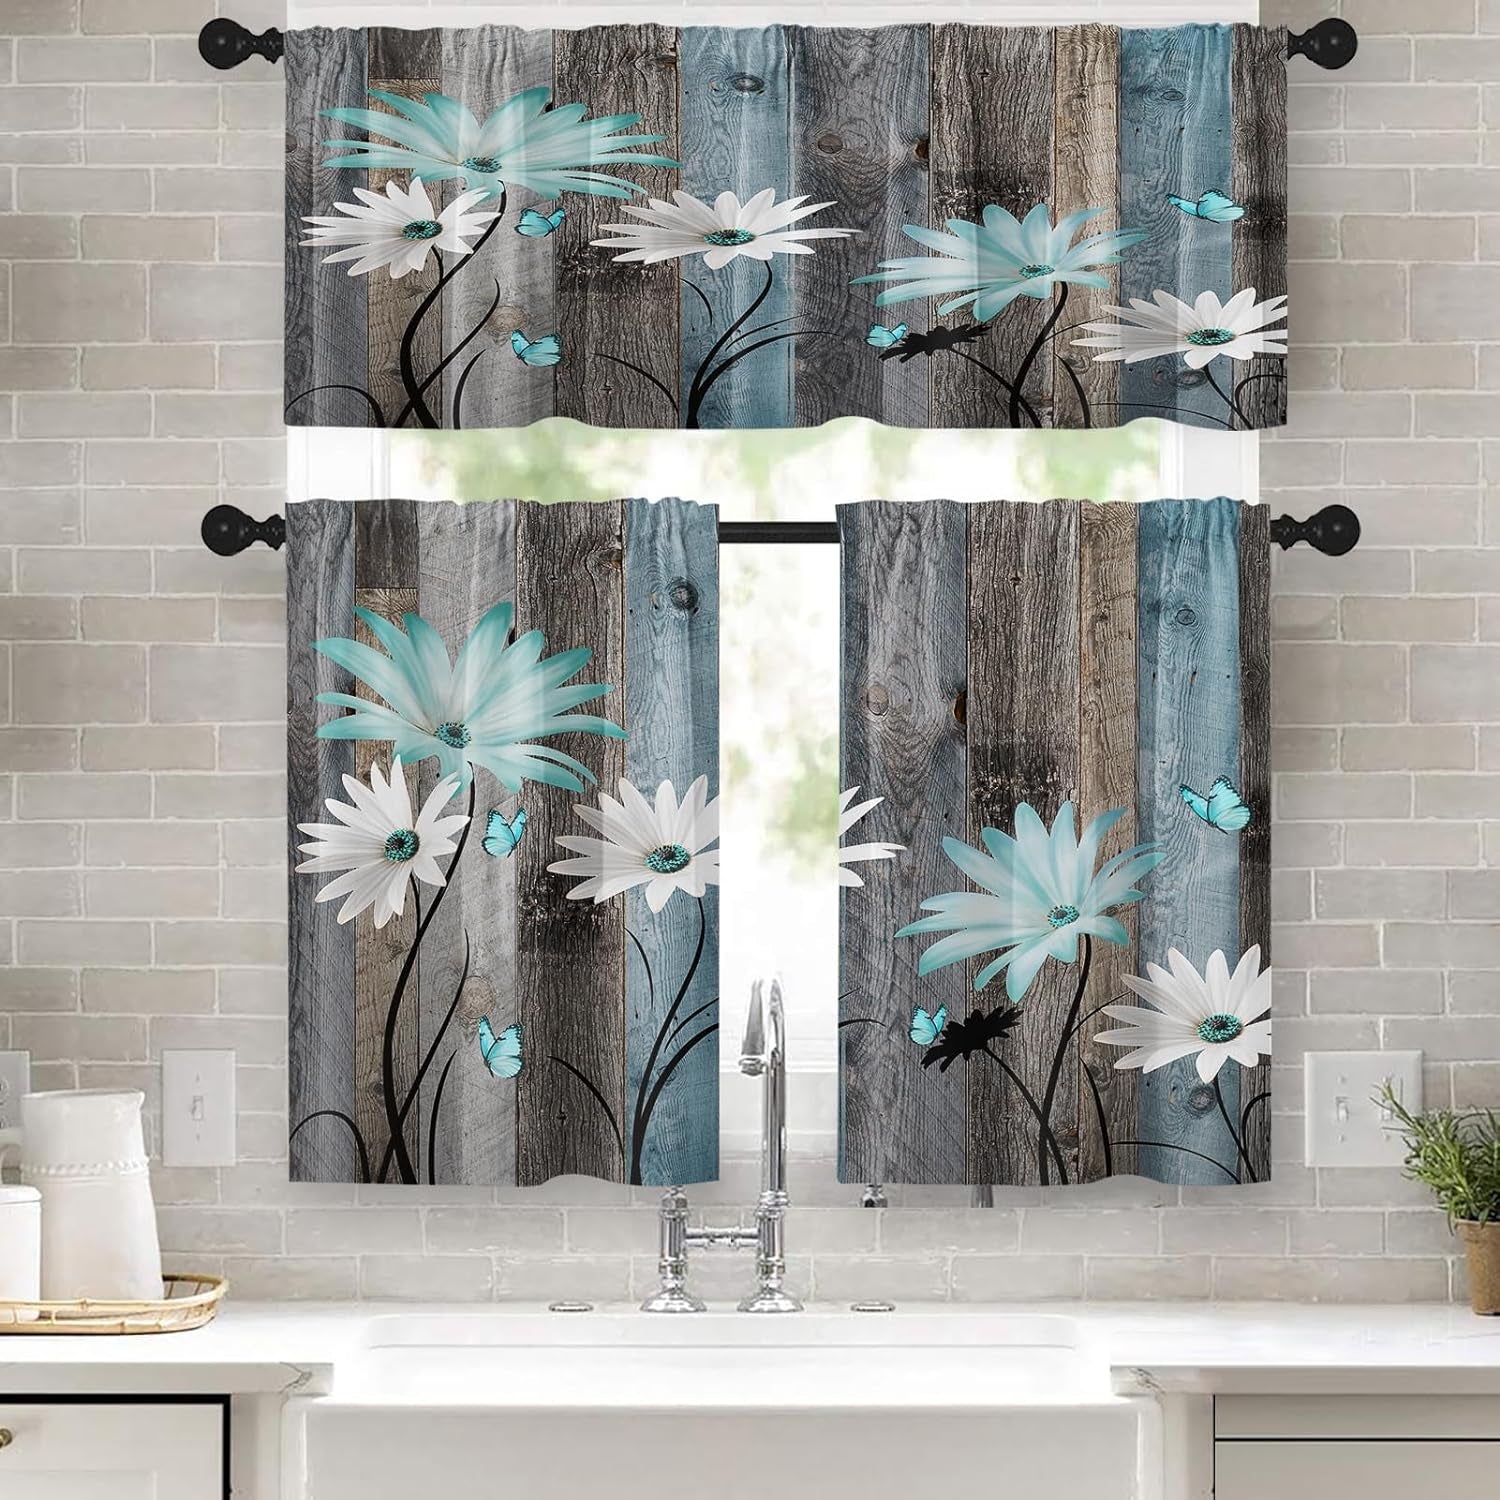 Farmhouse Floral Kitchen Window Curtains Valance and Tier Set 36 Inch, Watercolor Flower Vase Inspirational Quote 3 Piece Window Treatment Tiers Country Wooden Kitchen Decor Drapes